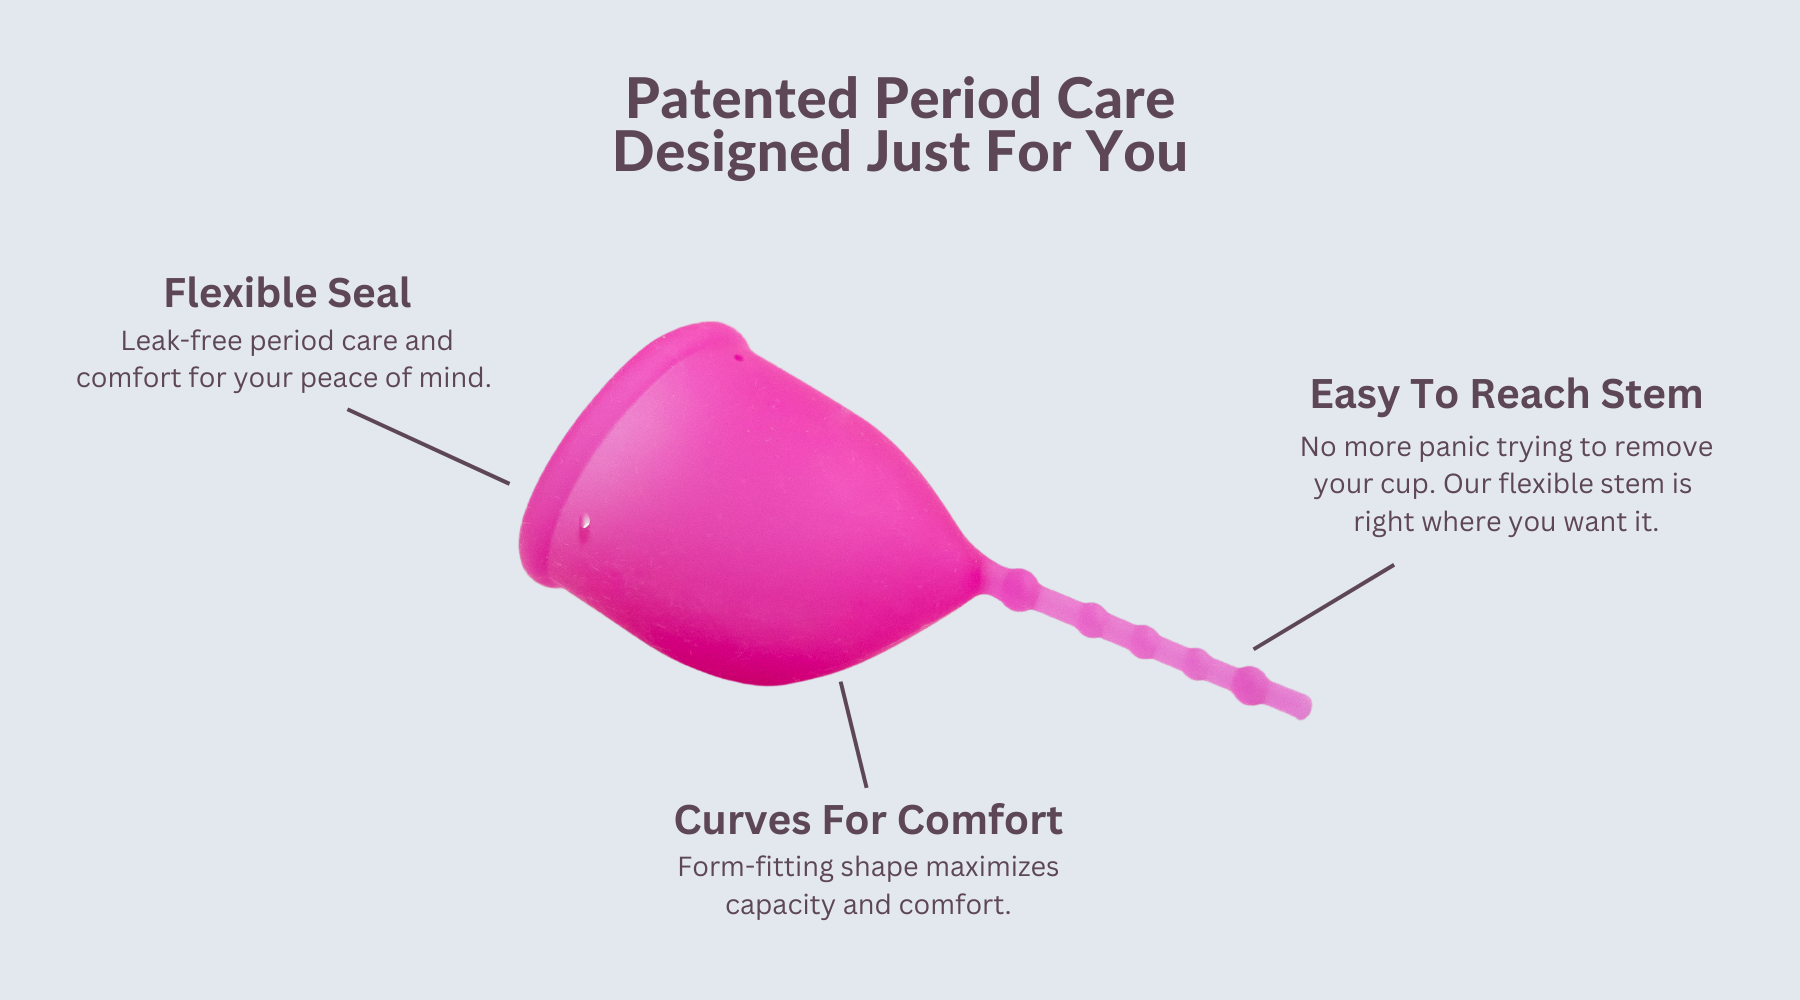 Patented Period Care. Designed Just For You. ID: Profile image of Kind Cup period cup menstrual cup ergonomic shape. Flexible Seal. Leak-free period care and comfort for your peace of mind. Easy to reach stem. No more panic trying to remove your cup. Our flexible stem is right where you want it. Curves for Comfort. Form-fitting shape maximizes capacity and comfort. Best period cup. Best menstrual cup. High cervix menstrual cup. Period cup that reduces cramps. Menstrual cup that reduces pressure on bladder.